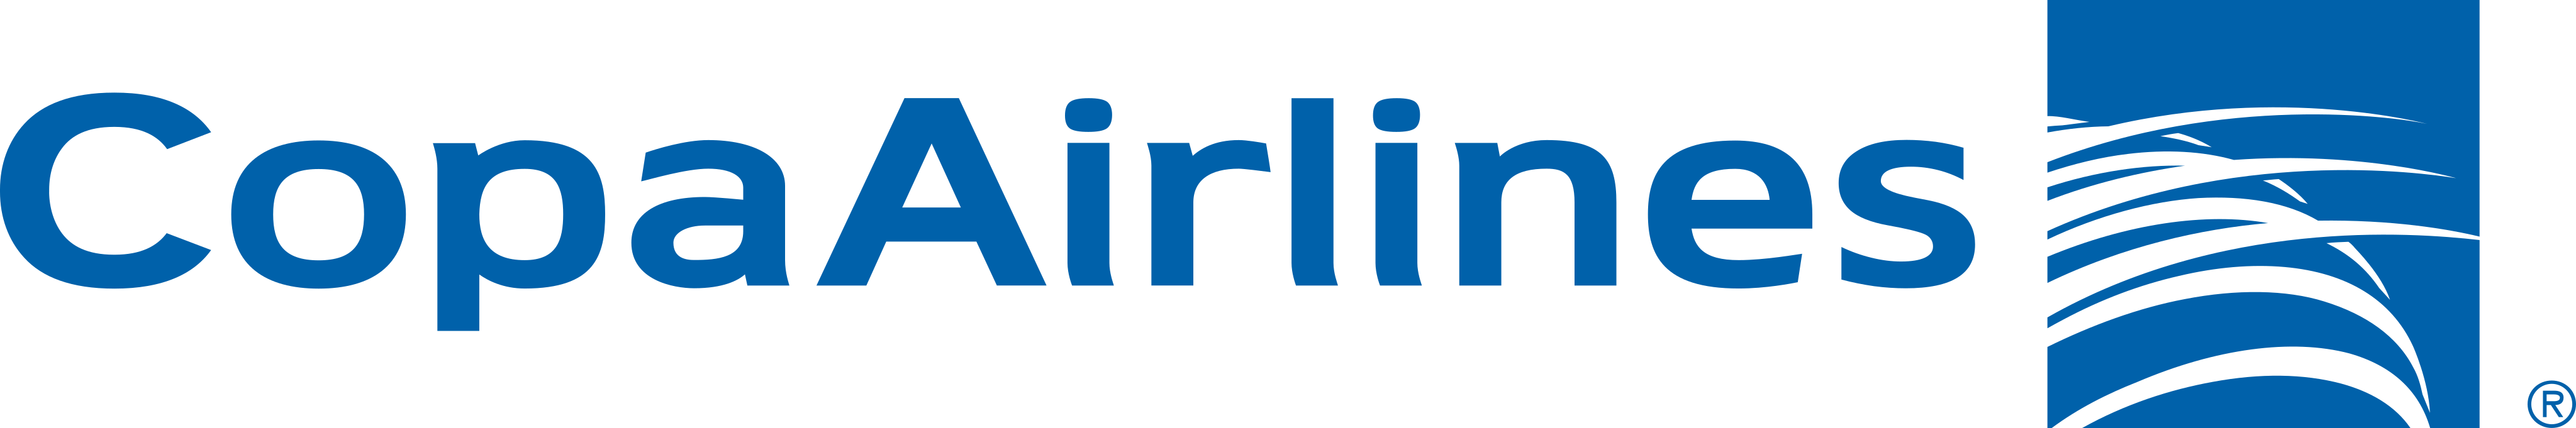 copa-airlines-logo-2